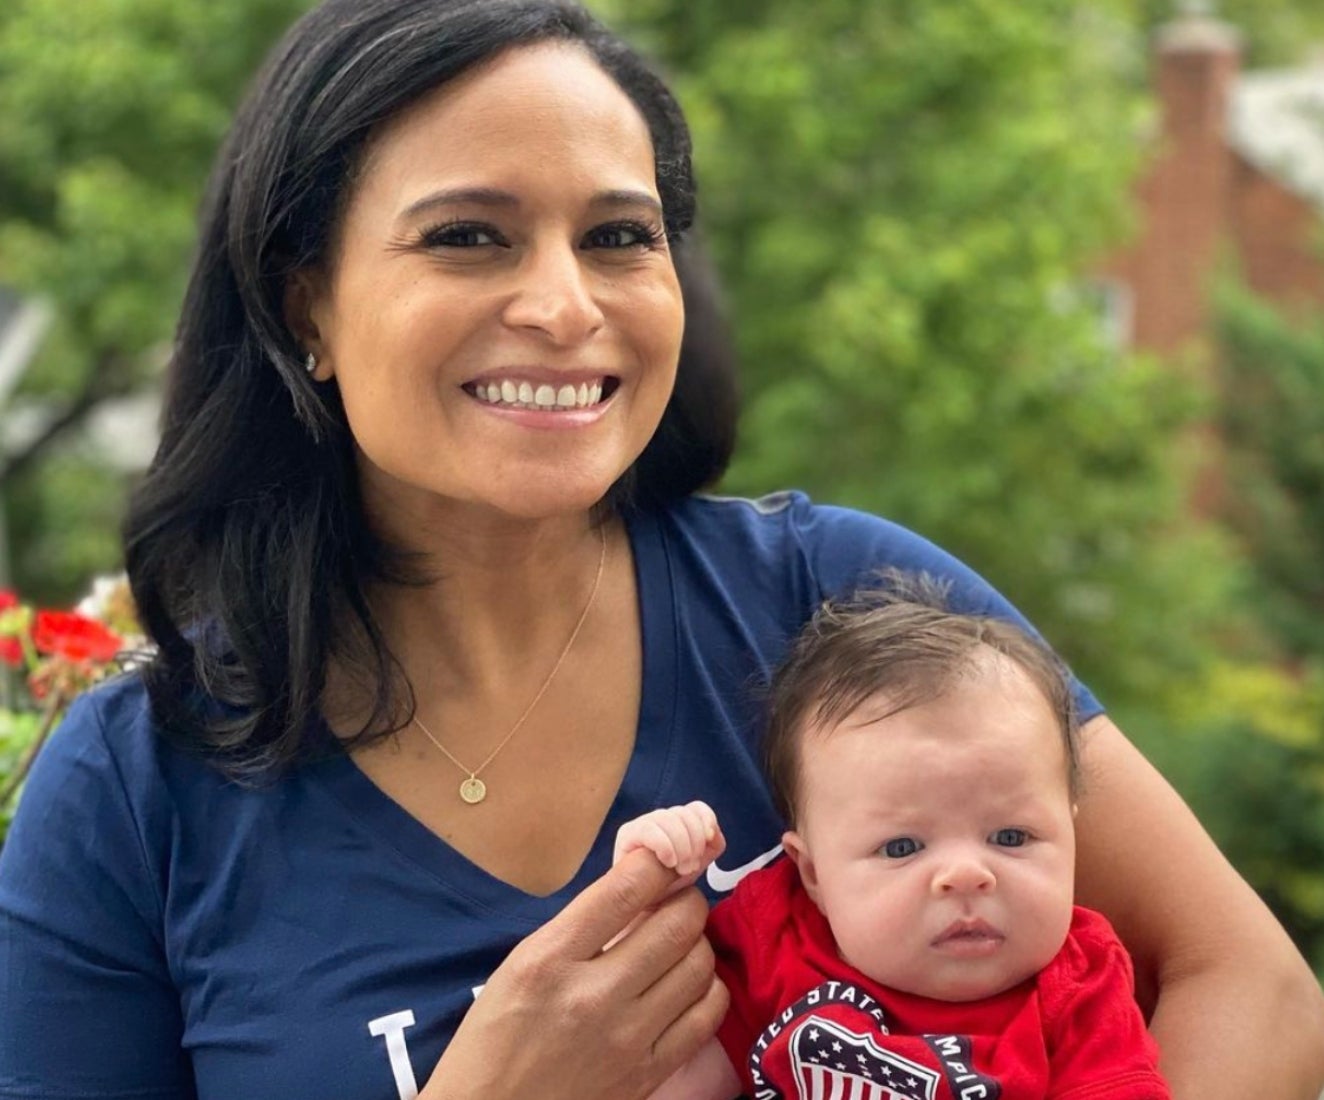 Kristen Welker On Dealing With Self-Doubt Before Welcoming Daughter Born Via Surrogate And Her Love Of Motherhood